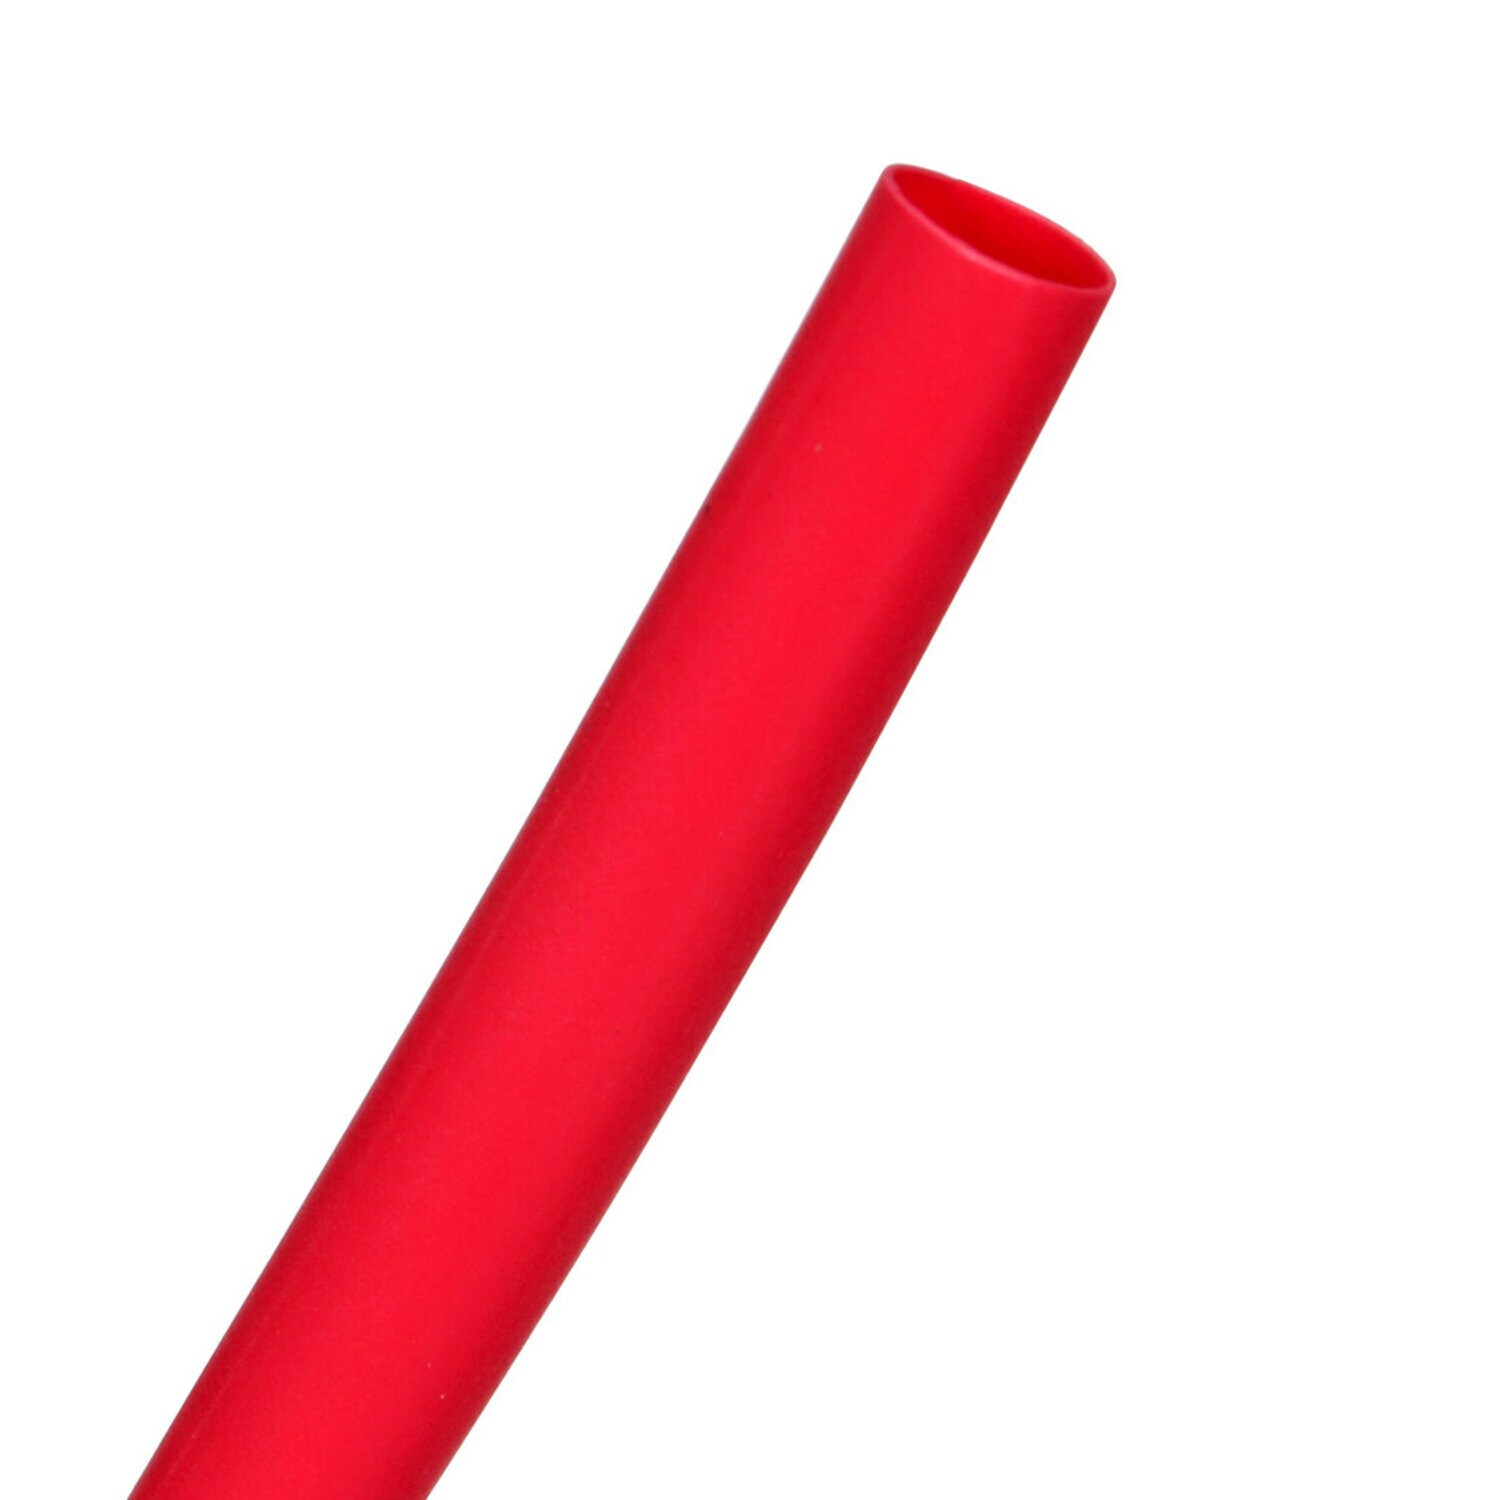 7010400836 - 3M Heat Shrink Thin-Wall Tubing FP-301-3/16-48"-Red-250 Pcs, 48 in
Length sticks, 250 pieces/case